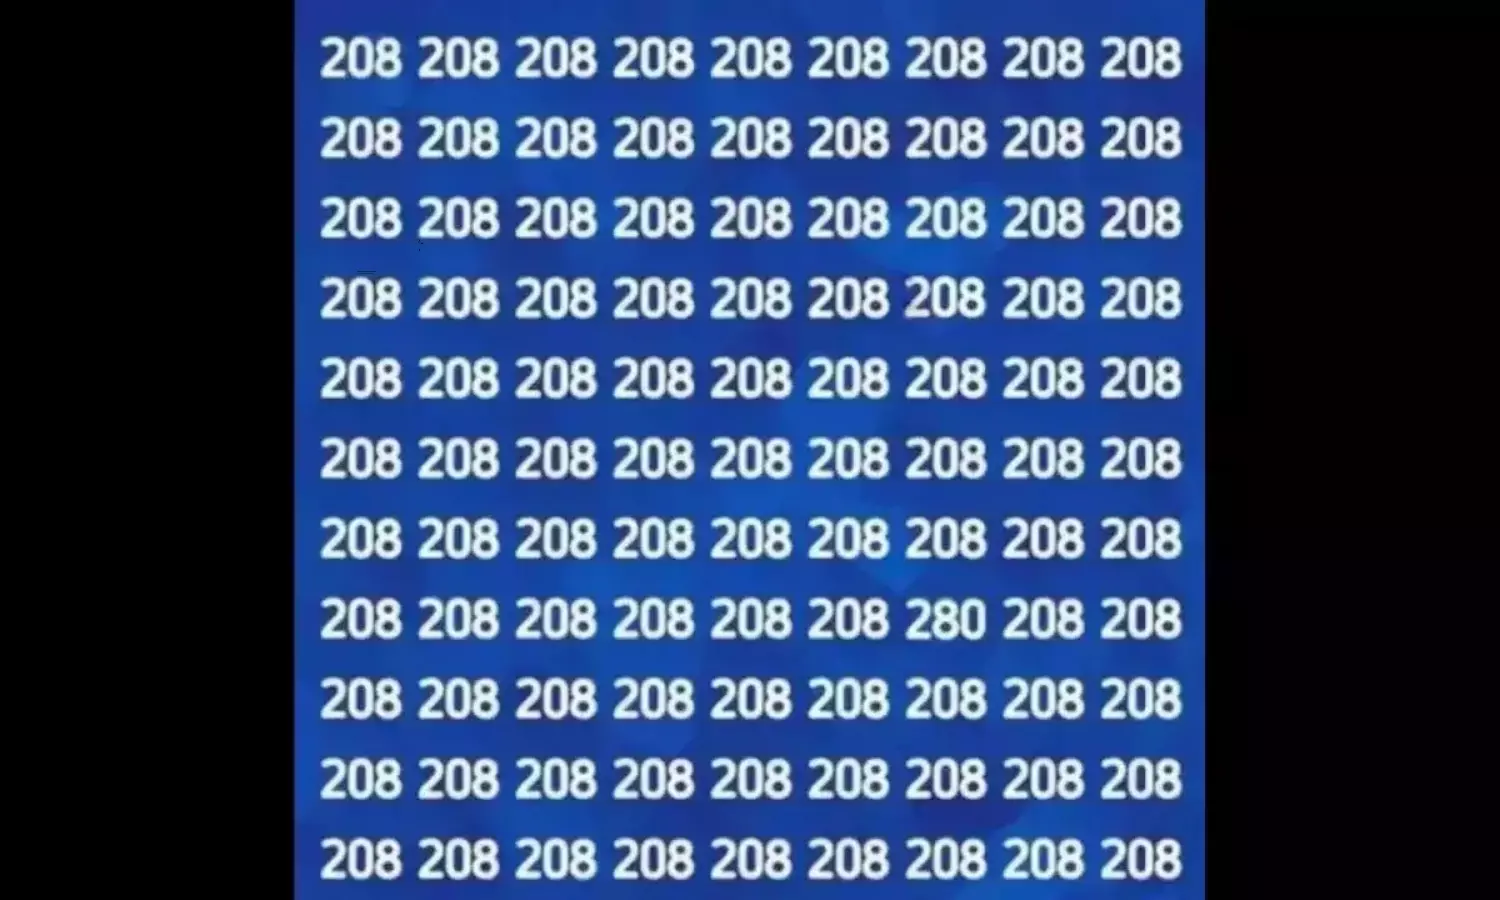 Can You Find There is 280 Number Among the 208 Number in This Photo Puzzle